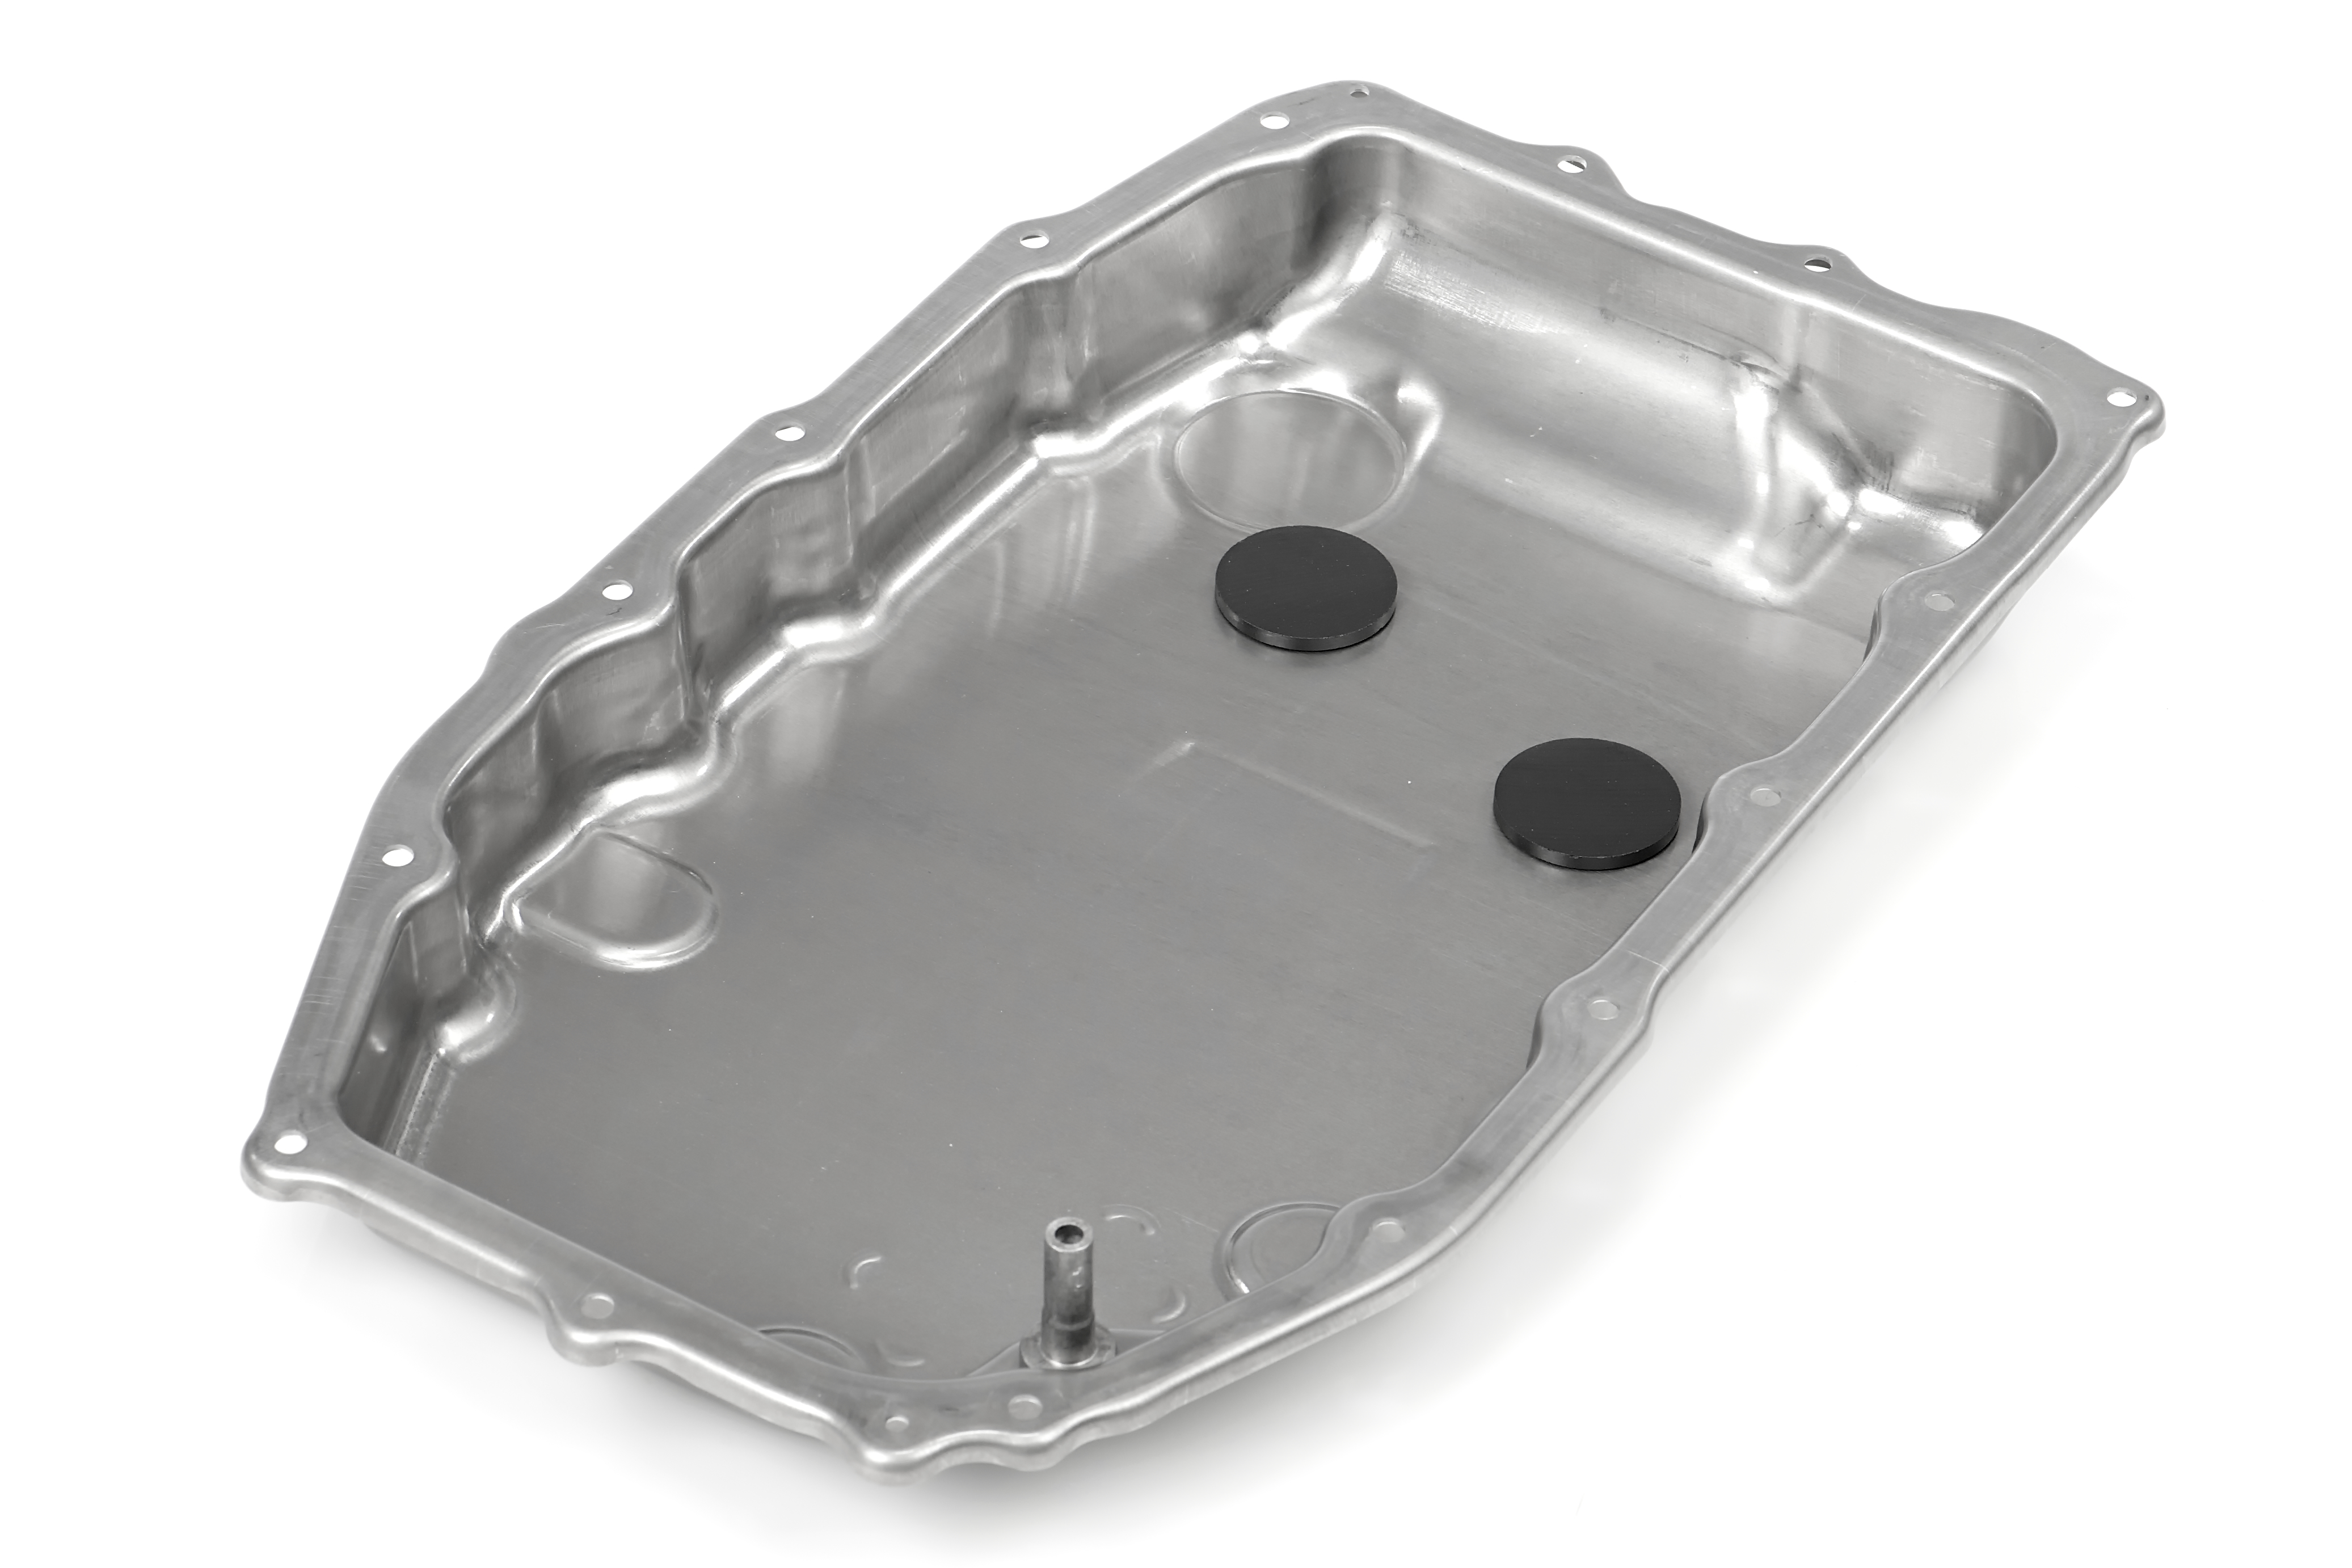 Picture of an aluminum oil pan cover